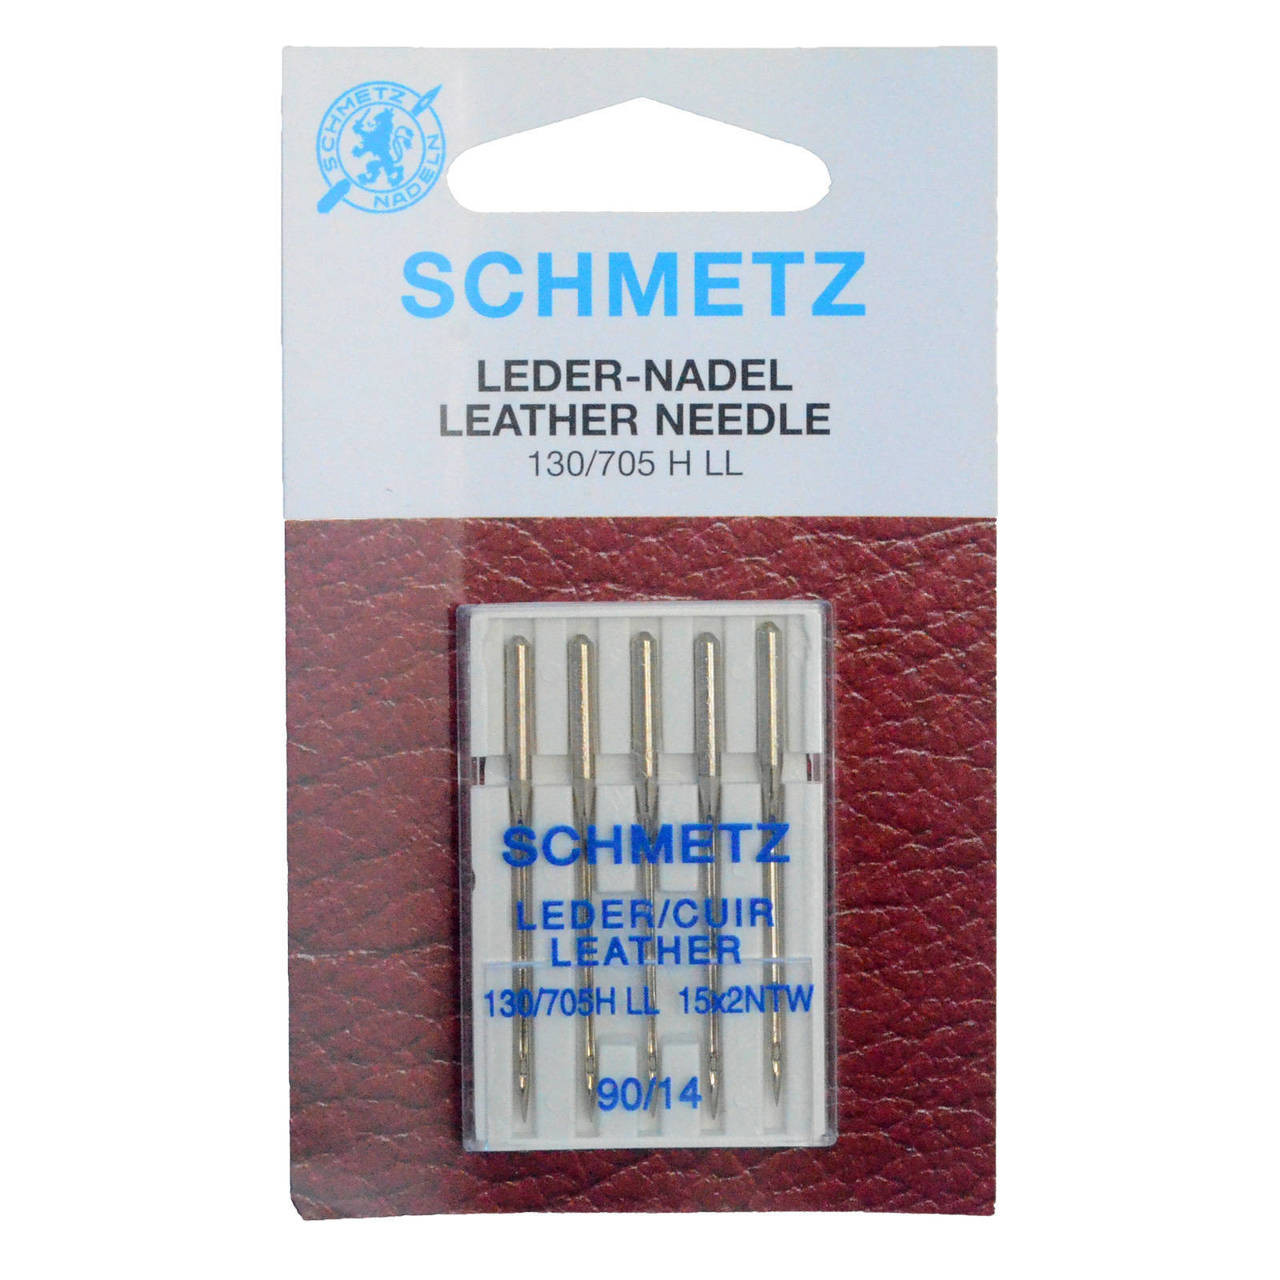 Schmetz Leather Sewing Machine Needles Size 90/14 Pack of 5 - Old